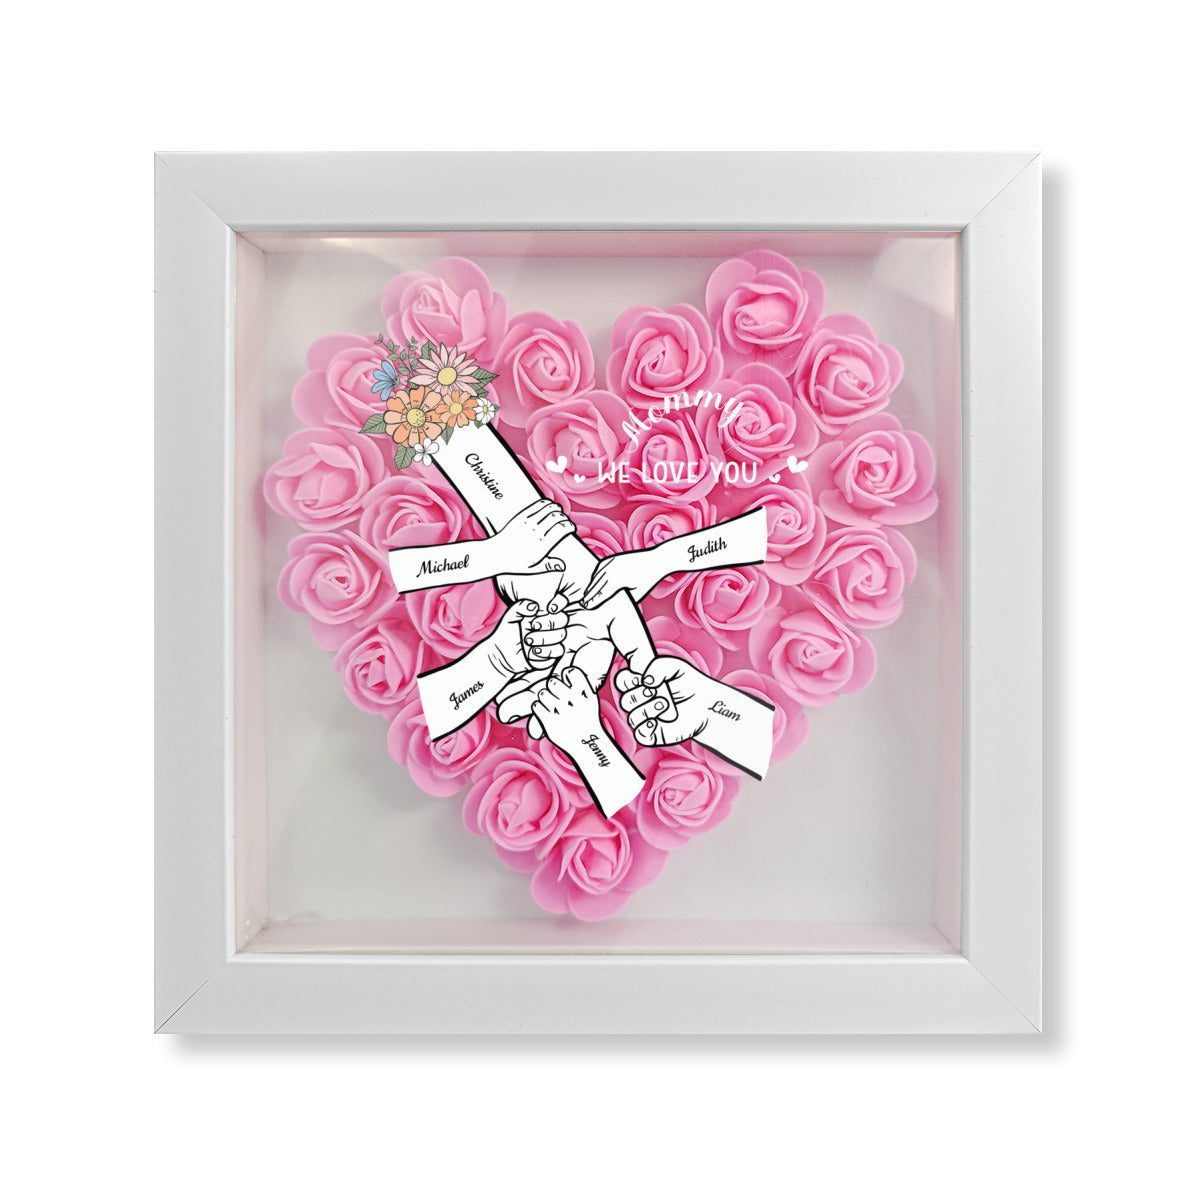 Mom and Kids Holding Hands-Personalized Flower Shadow Box gift for Mom